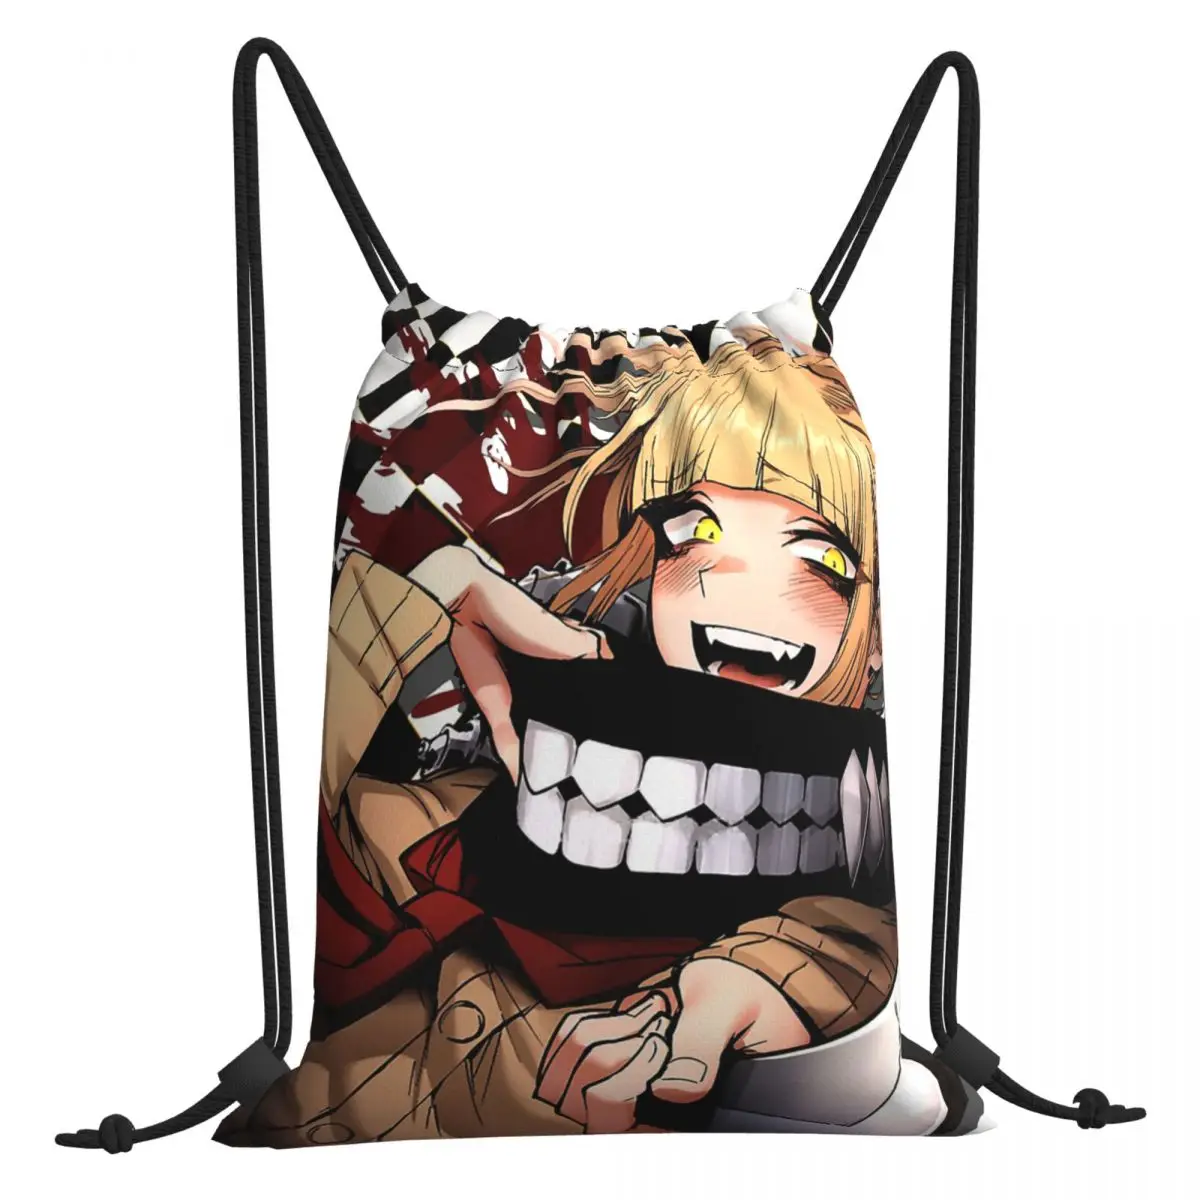 

Himiko Toga Blood Checkers Classic My Hero Academia Portable Hiking Drawstring Bag Riding Backpack Gym Clothes Storage Backpacks